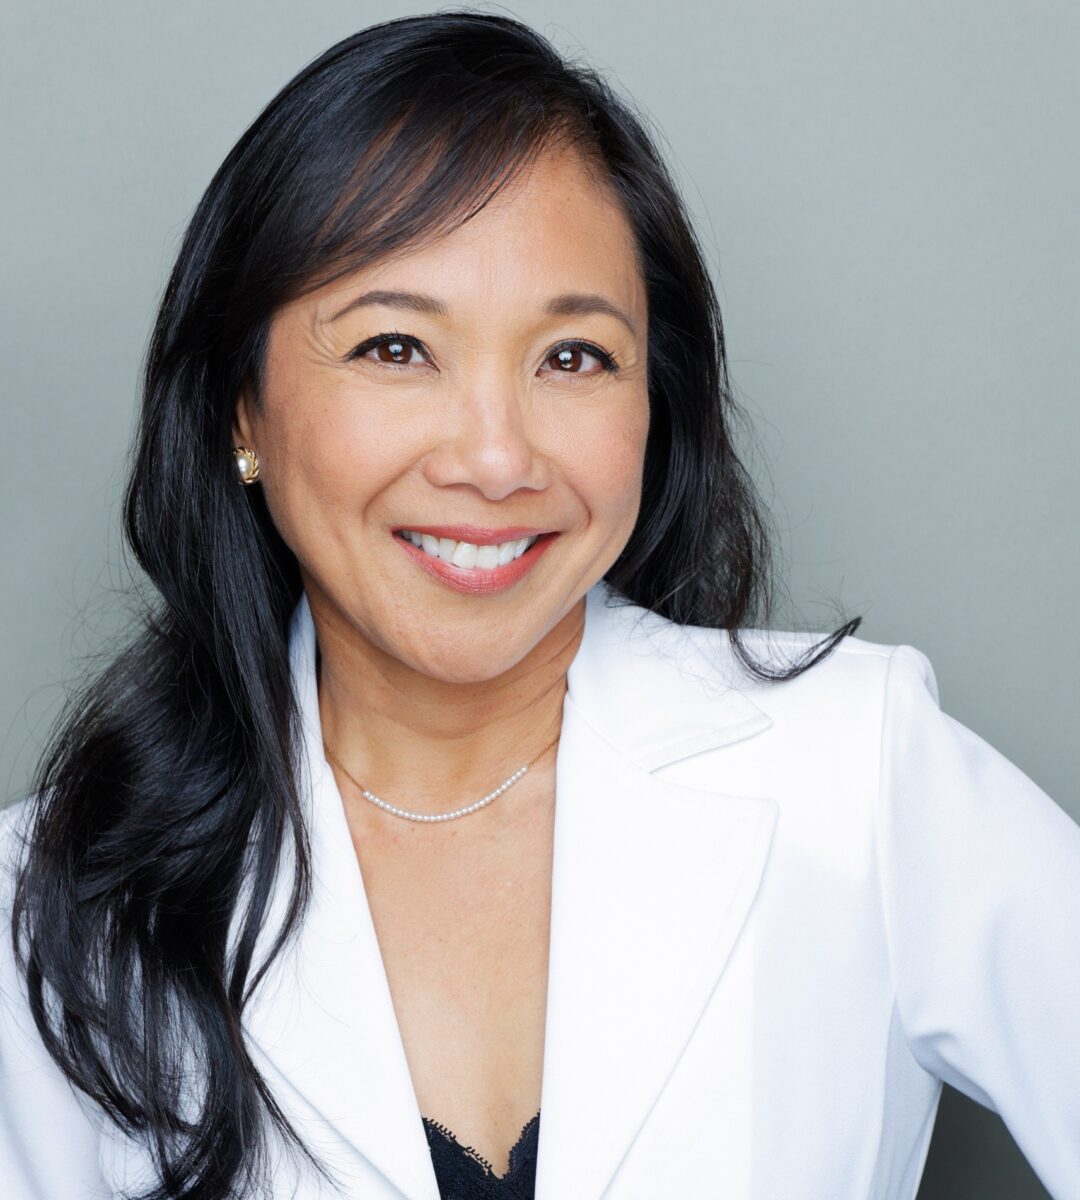 Jennifer Aquino smiling and wearing a lab coat over a black blouse.